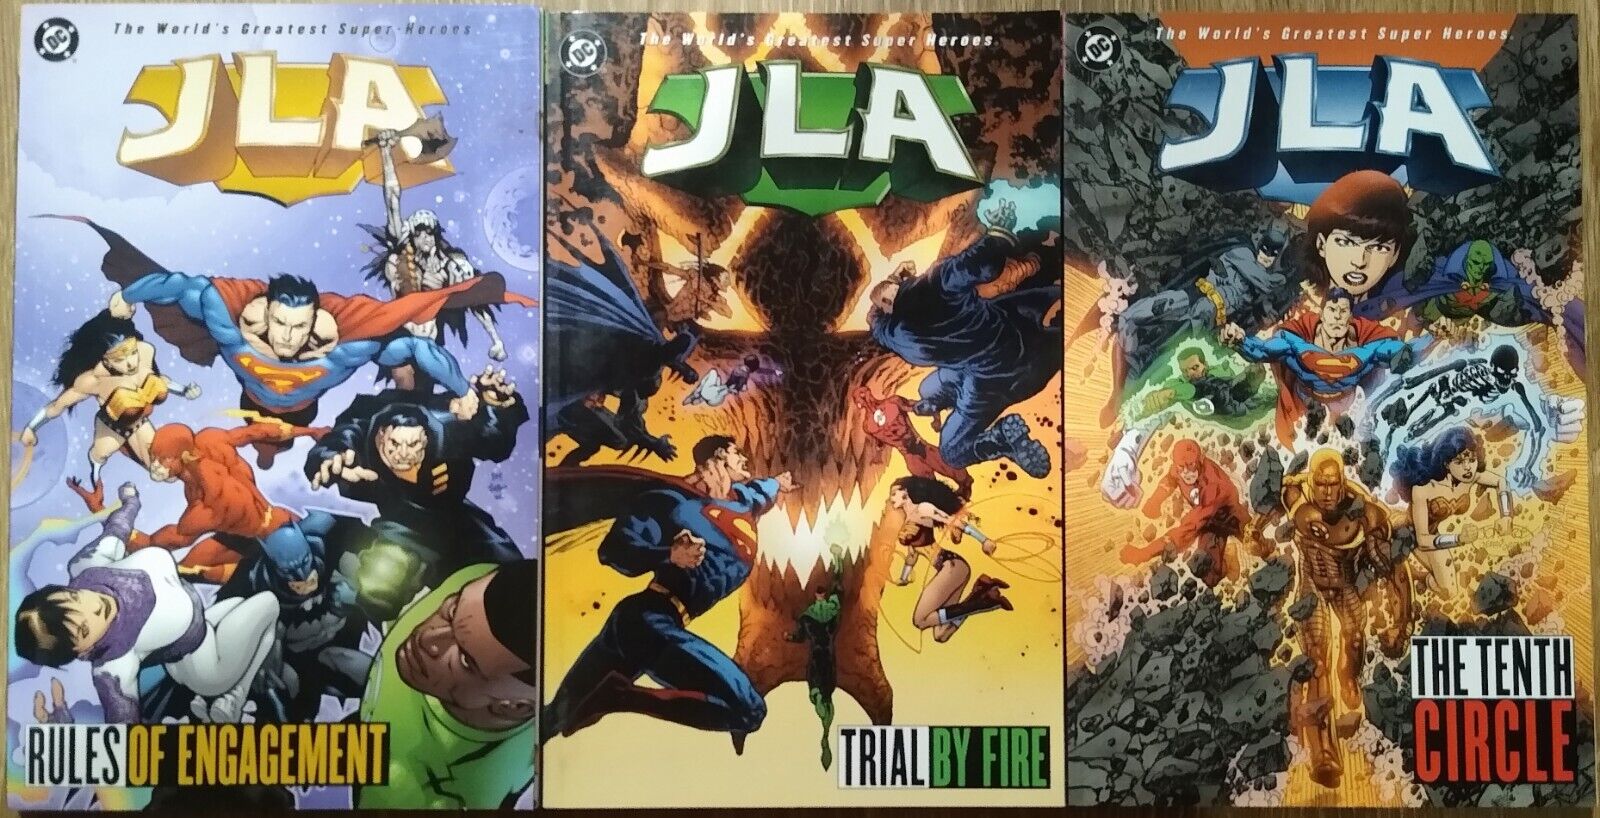 JLA #13 Rules of Engagement, #14 Trial by Fire, and #15 The Tenth Circle